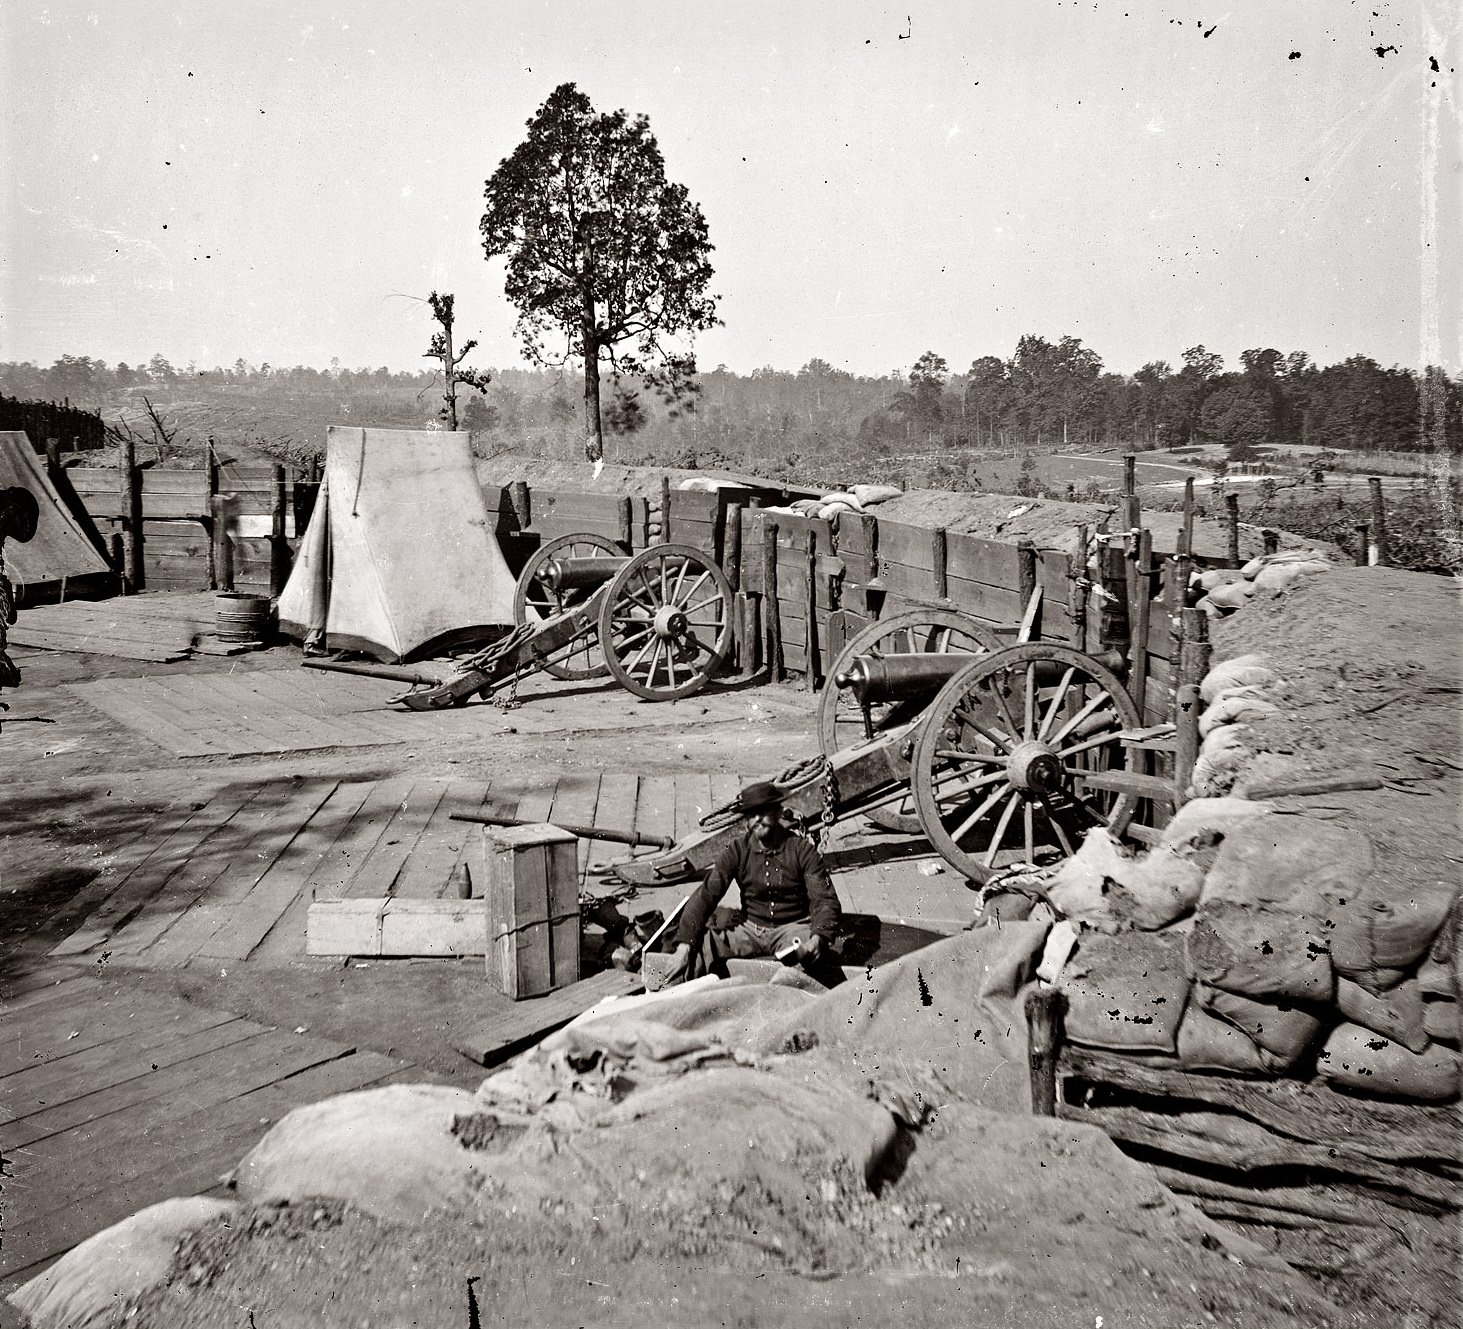 Union Army soldier at Confederate fortifications outside of Atlanta, 1864